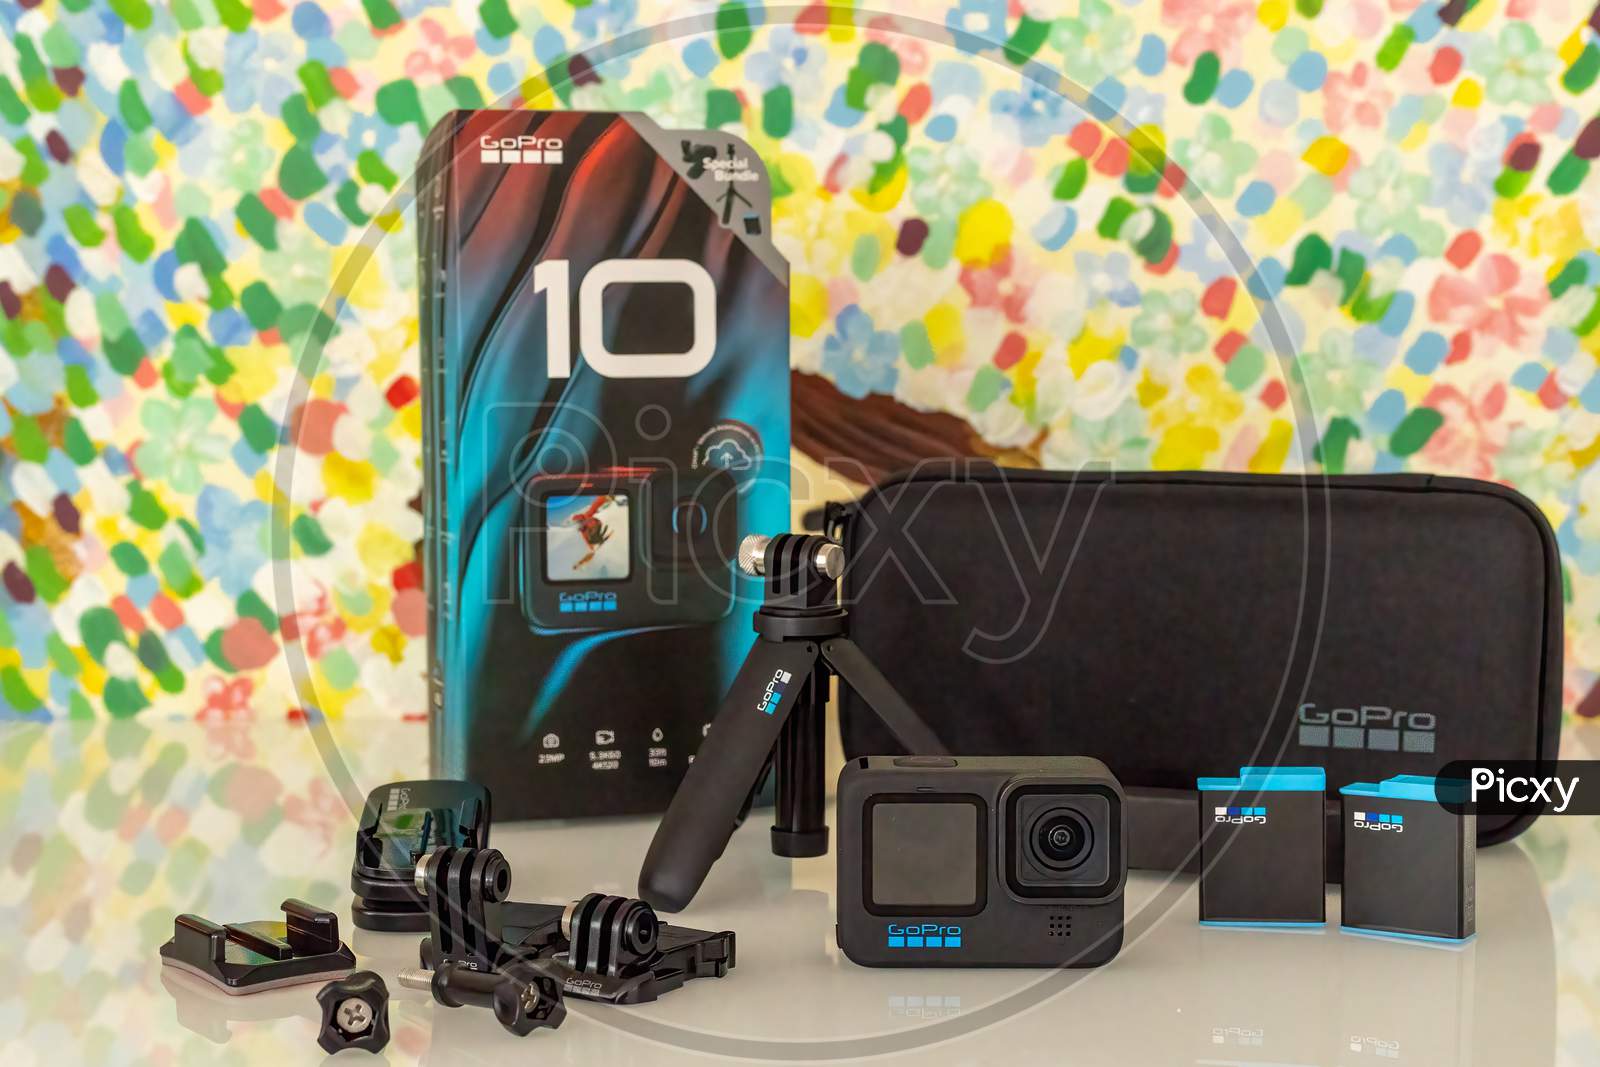 Frankfurt, Germany - 20th September 2021: A german photographer bought the all new GoPro Hero 10 action camera, unboxing the bundle with additional equipment.